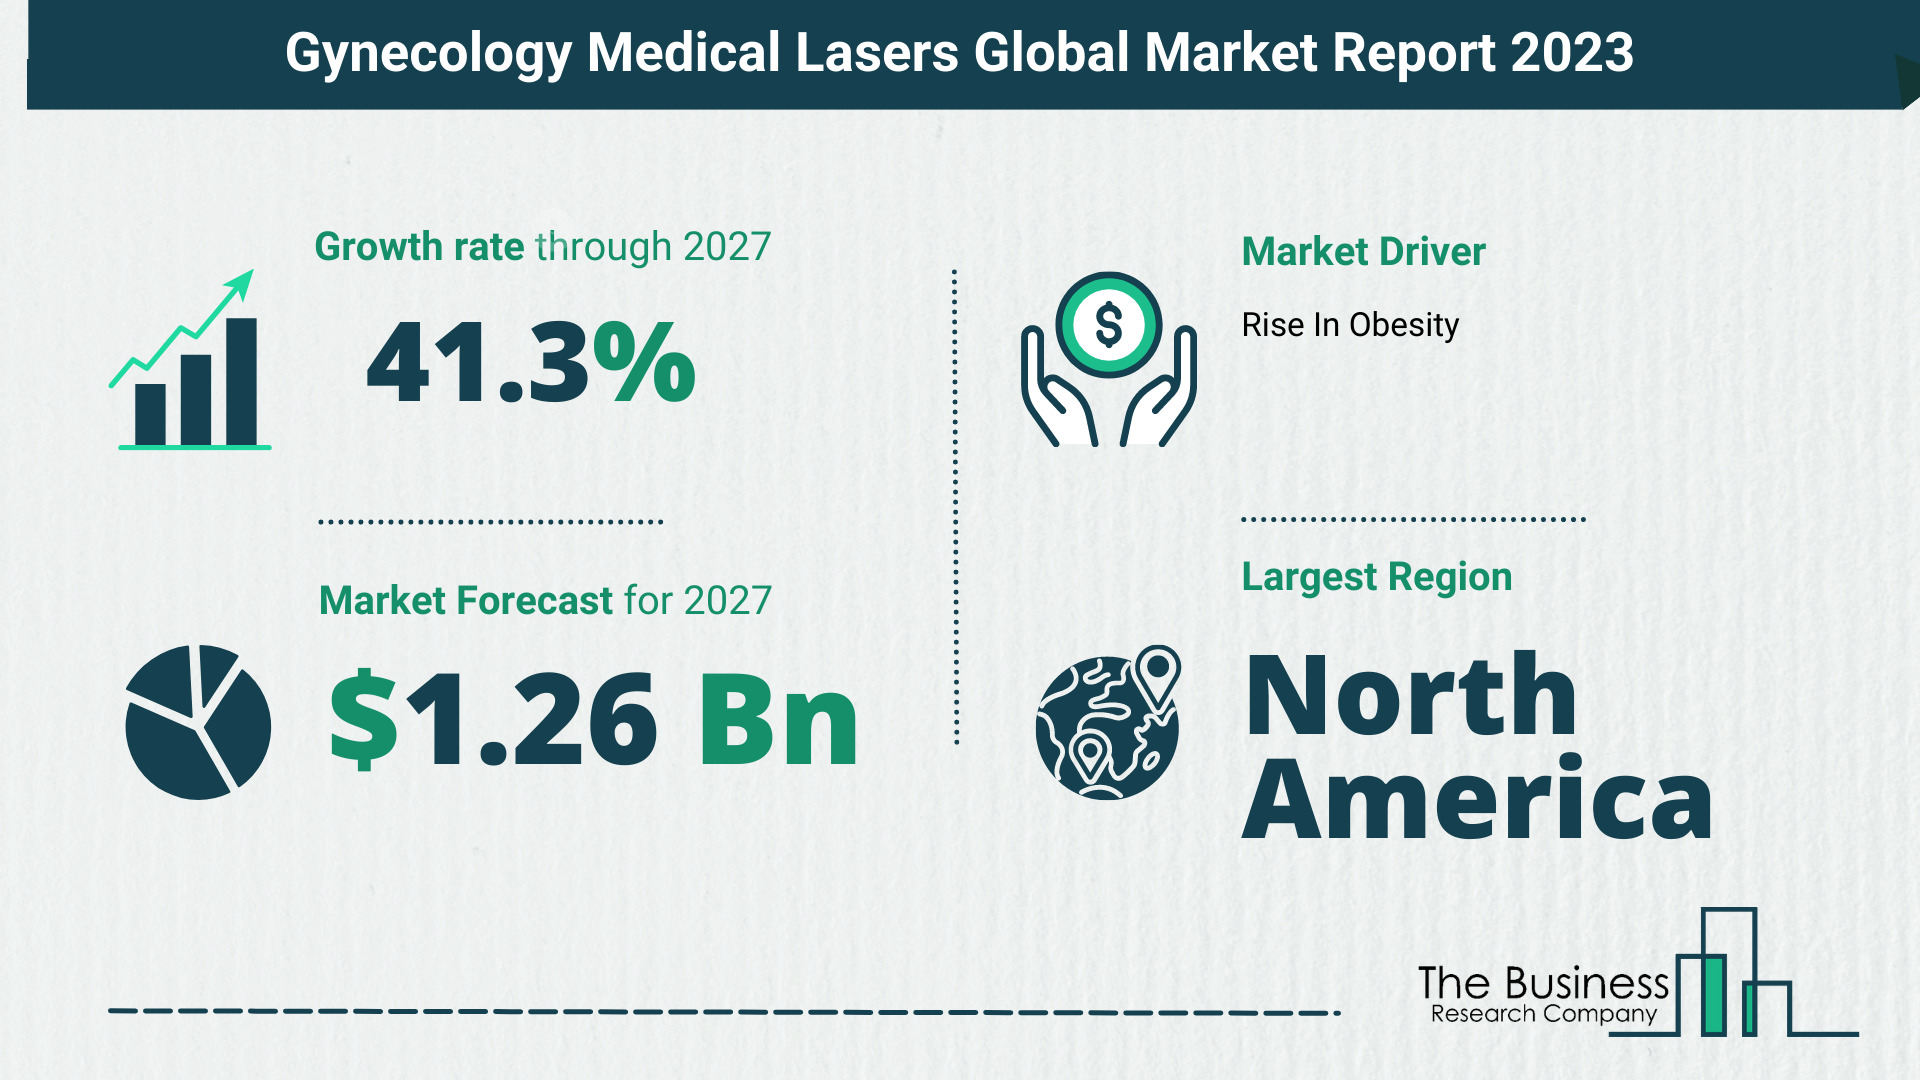 What Will The Gynecology Medical Lasers Market Look Like In 2023?